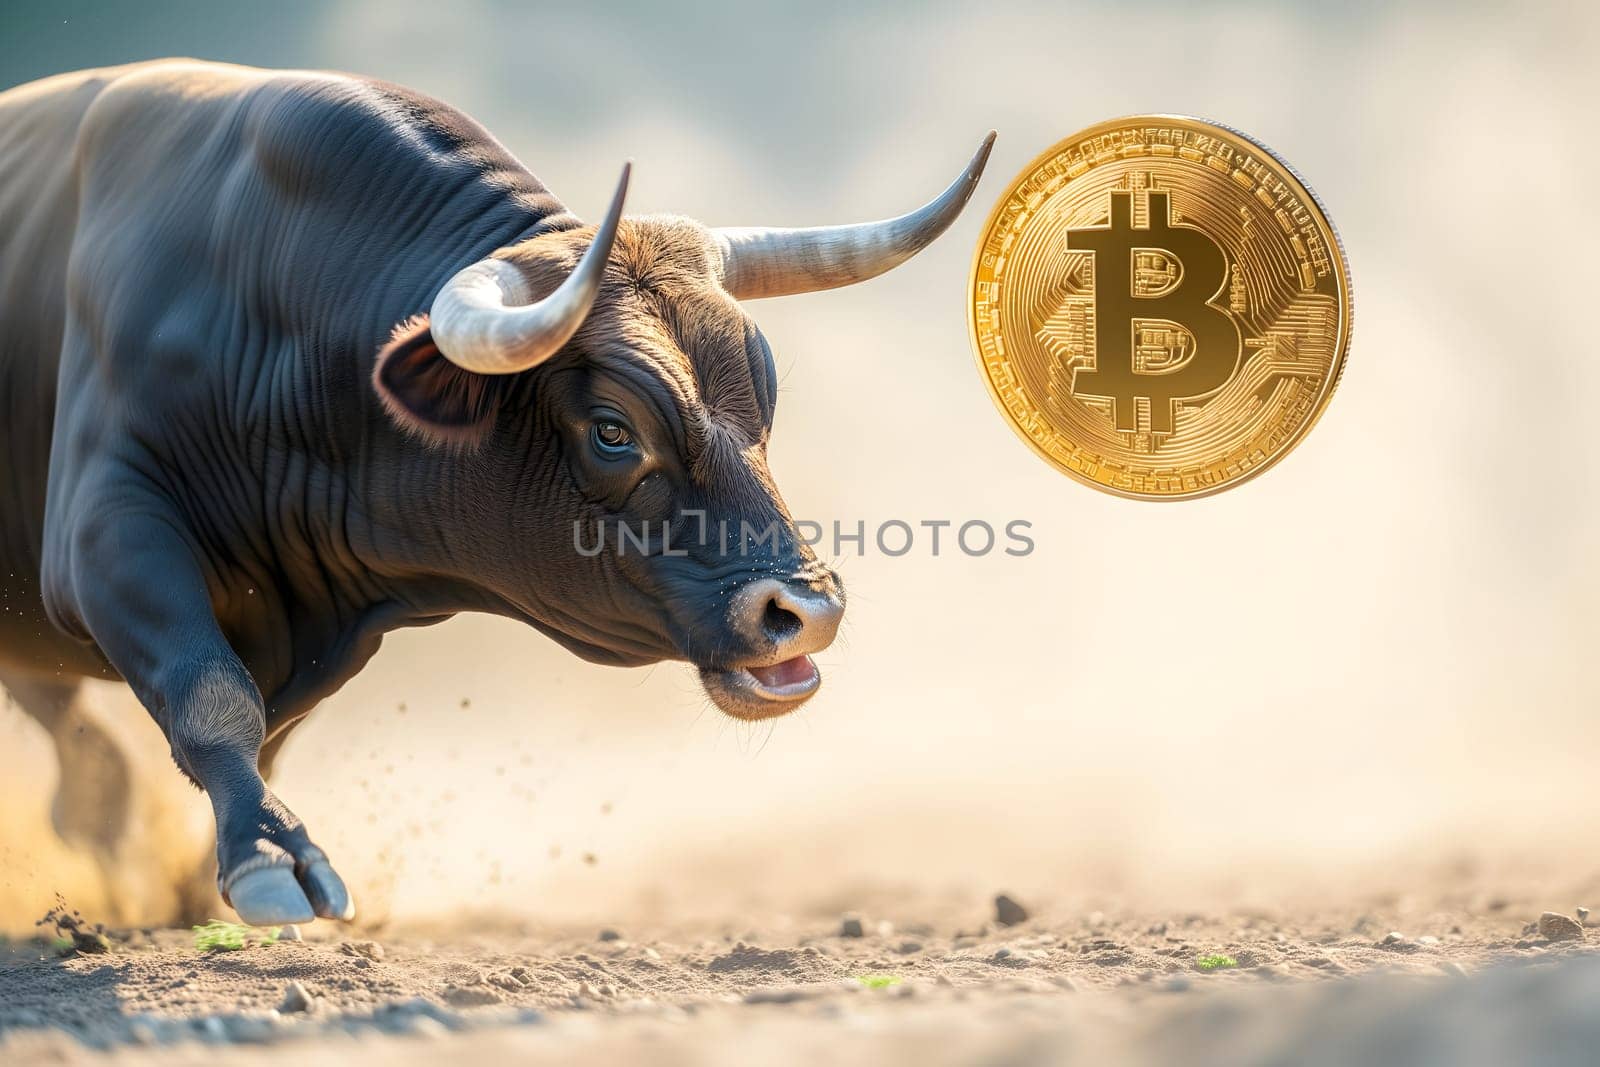 Bull pokes up bitcoin with its snout. Bullish trend concept. Neural network generated image. Not based on any actual person or scene.